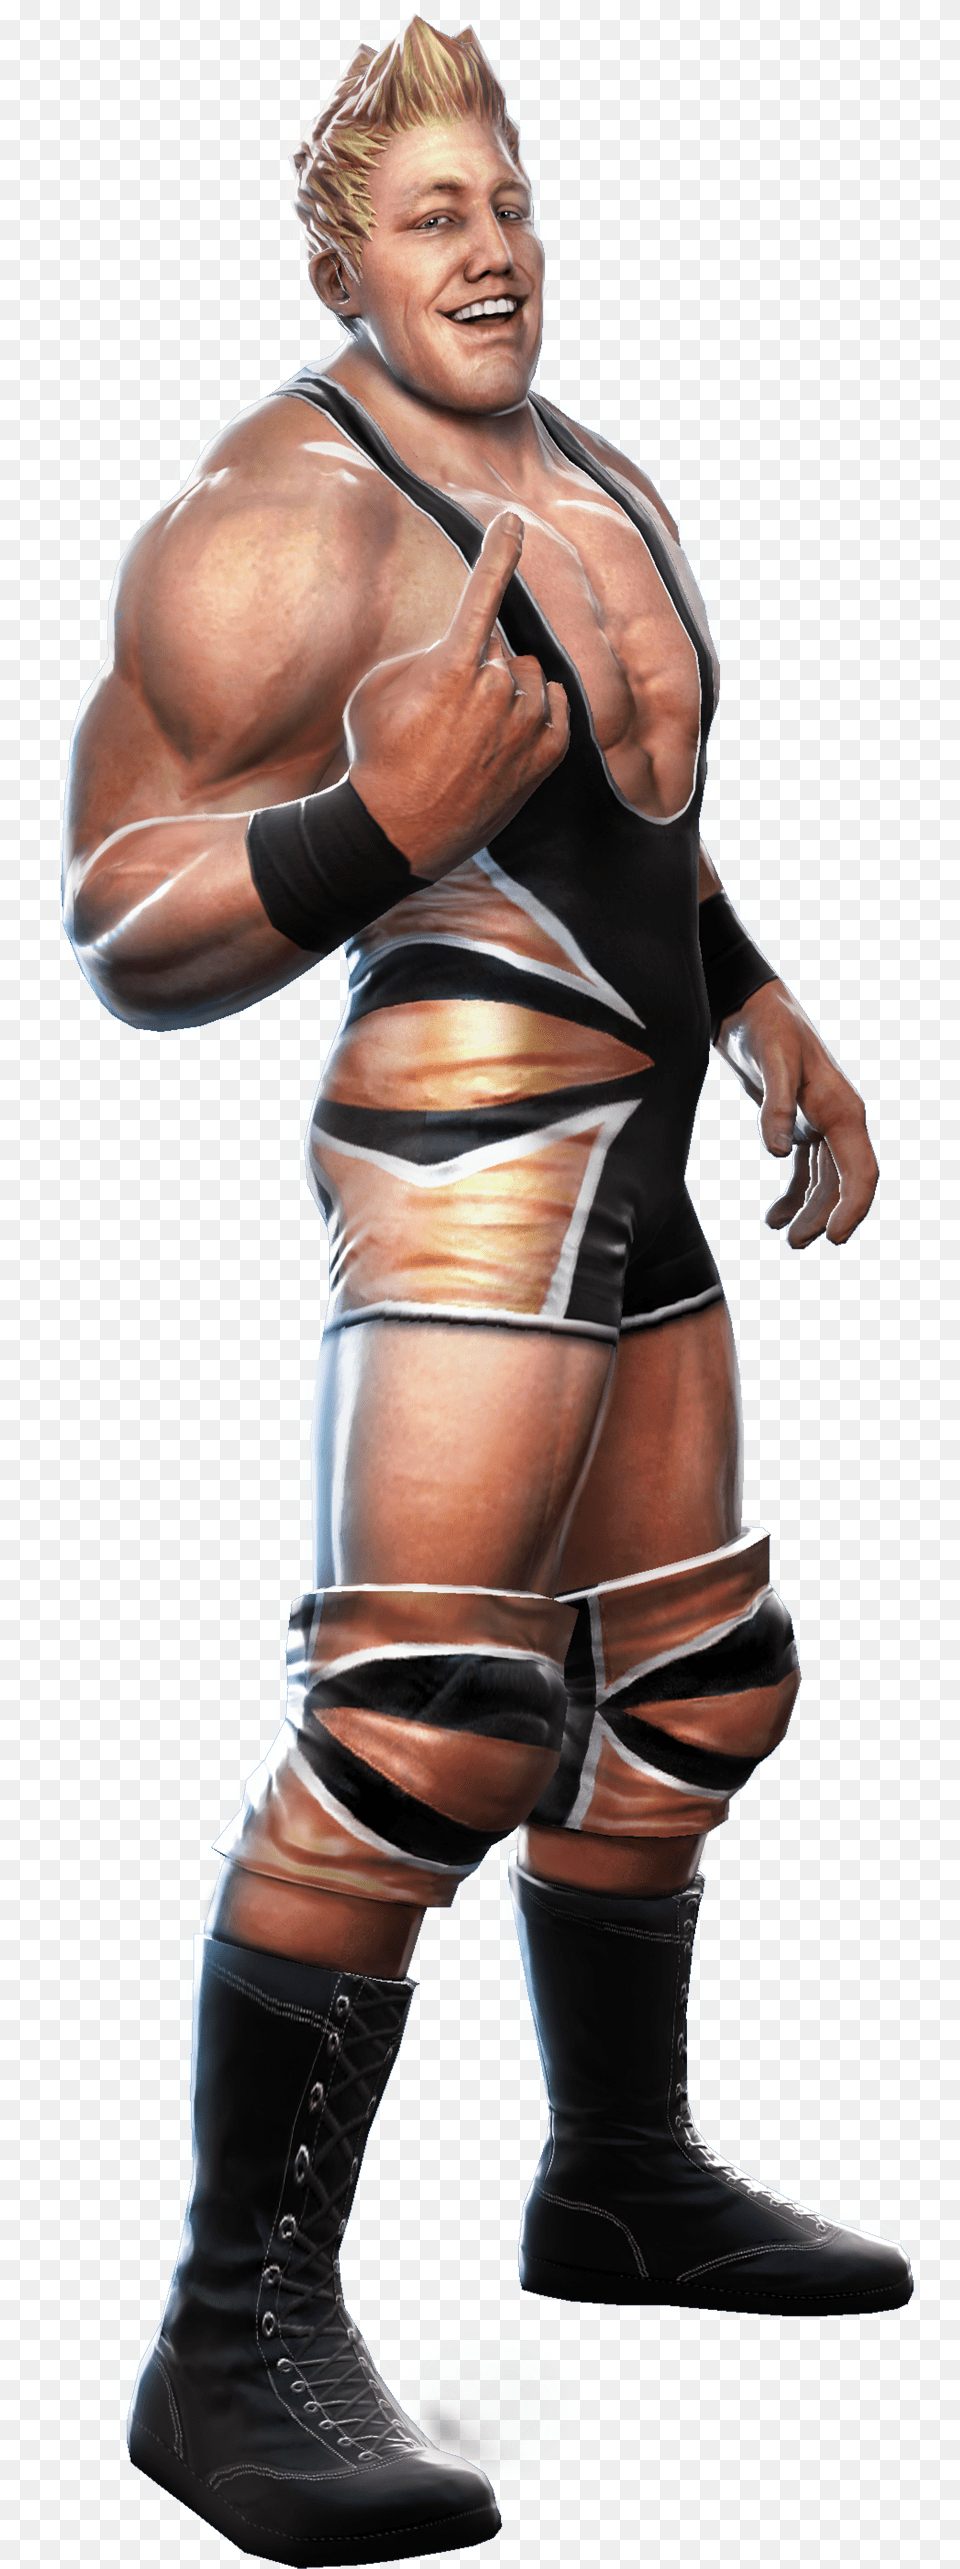 Jack Swagger Wwe All Stars Jack Swagger, Adult, Woman, Female, Person Png